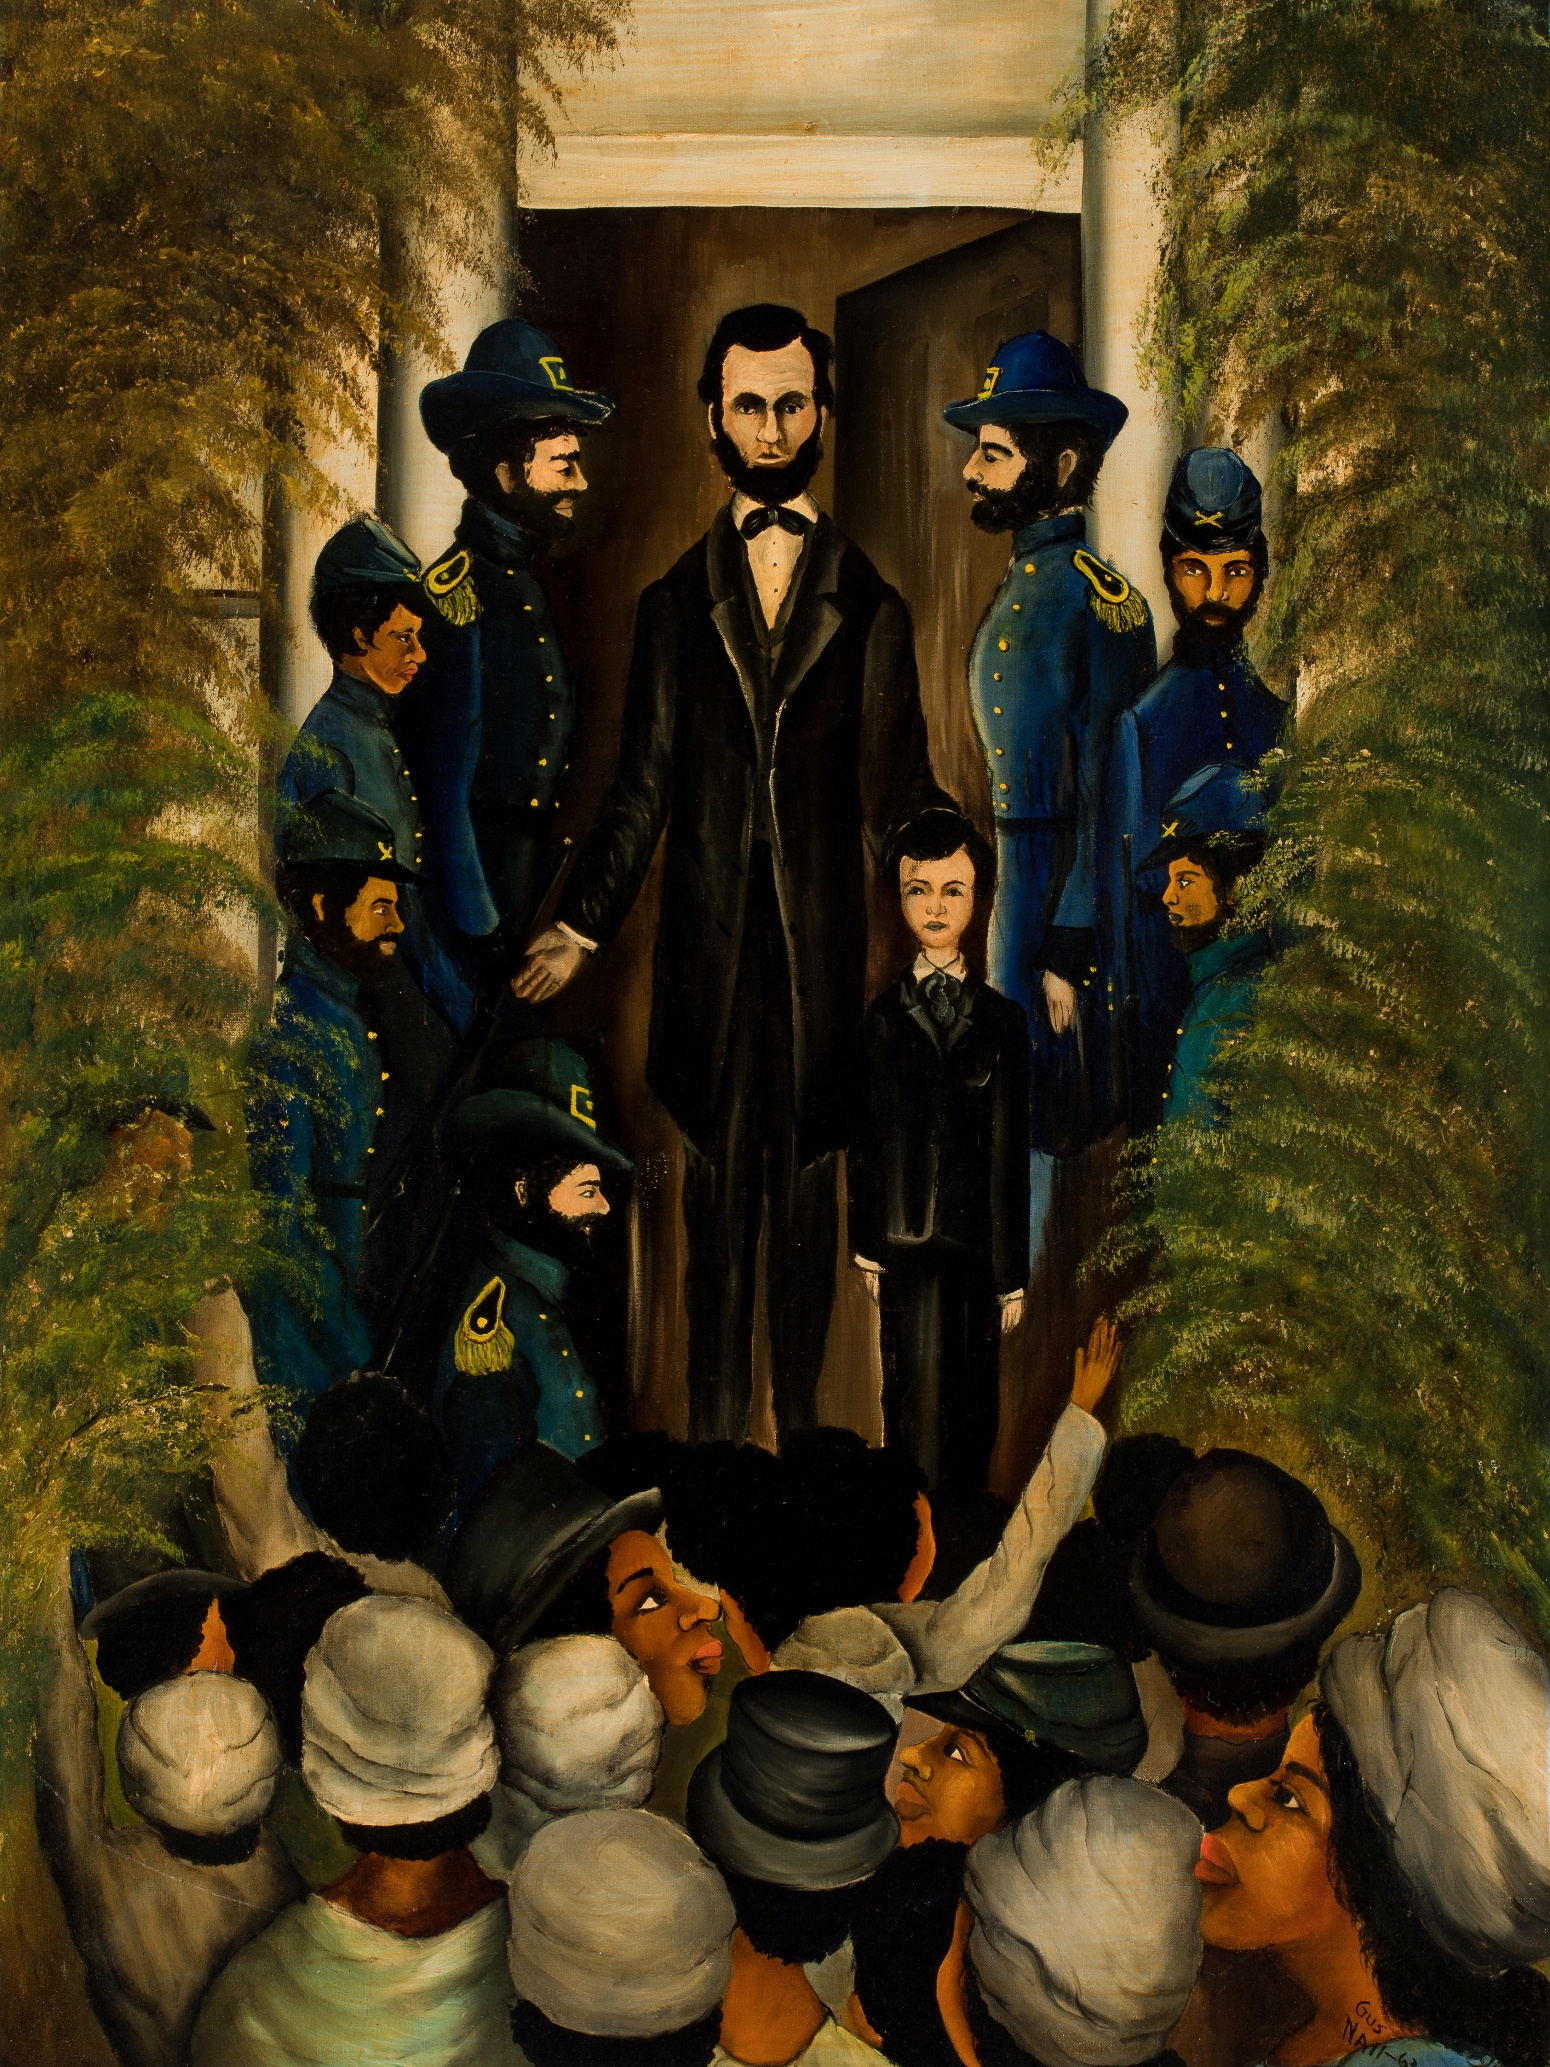 Gus Nall, <em>Lincoln Speaks to Freedmen on the Steps of the Capital at Richmond</em>, 1963, oil on canvas, 39.62 x 29.5 inches (DuSable Museum of African American History)